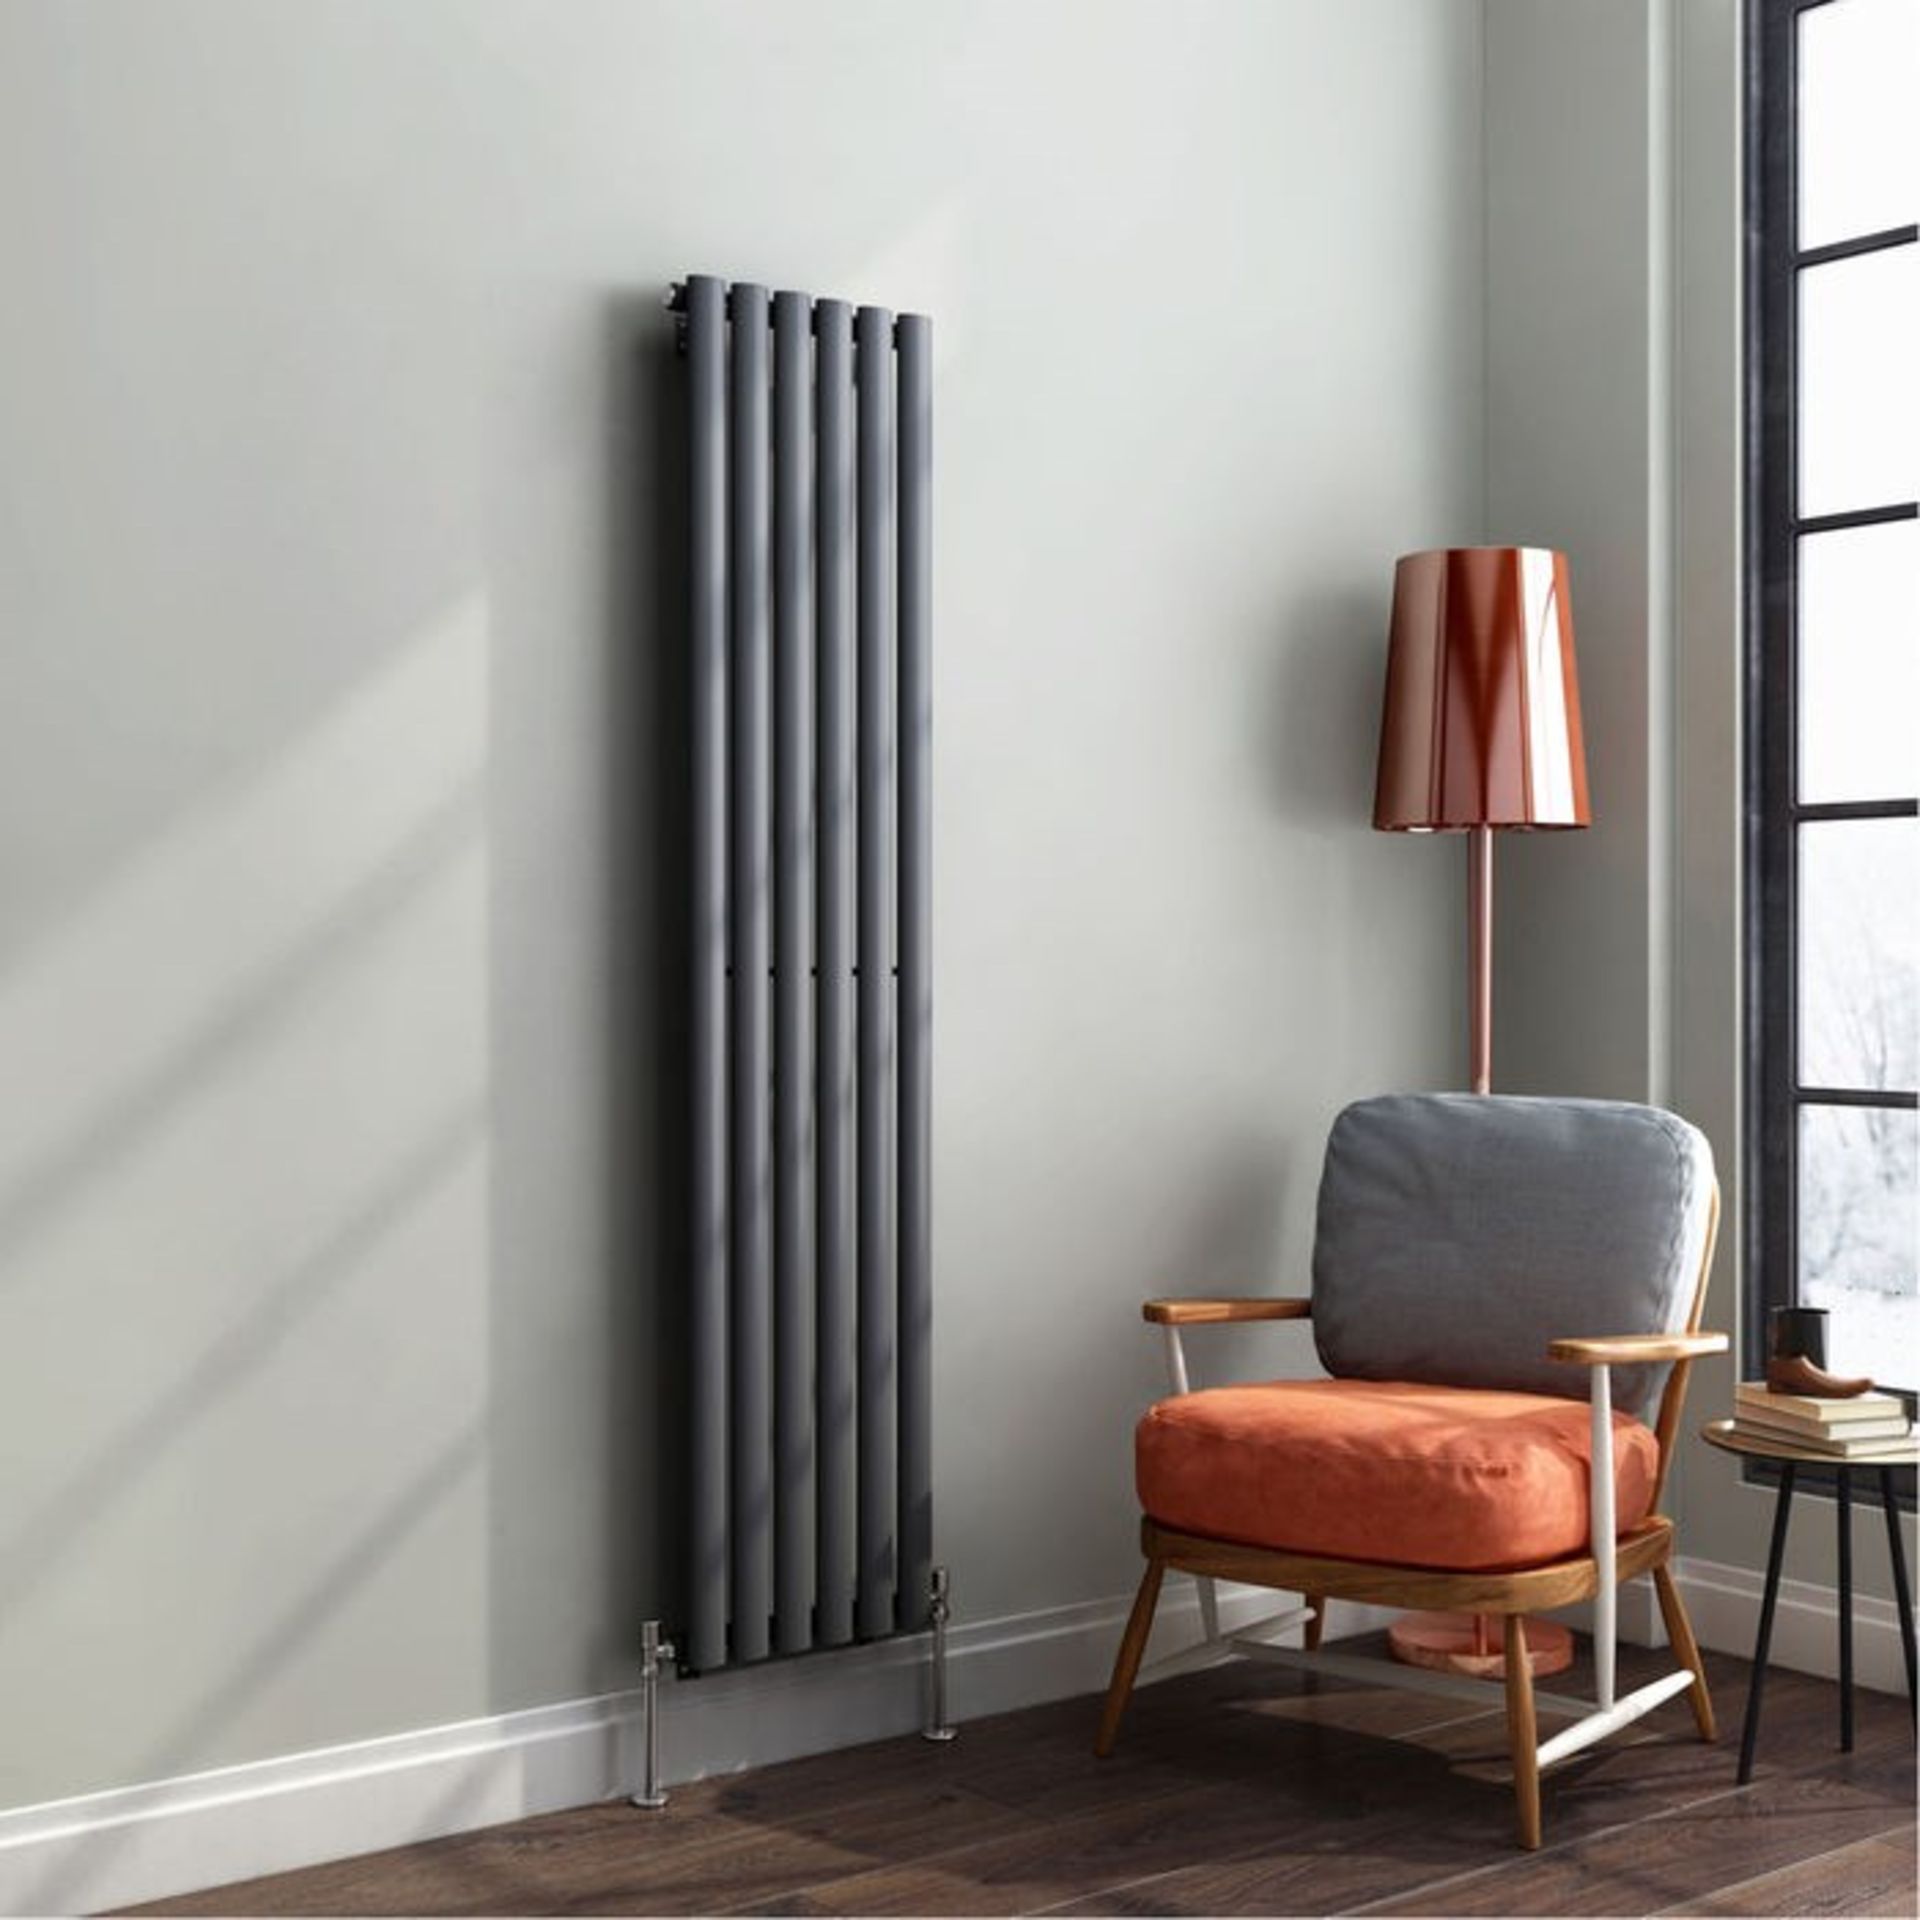 1600x360mm Anthracite Single Oval Tube Vertical Radiator.RRP £239.99.RC52.Made from low carbon... - Image 2 of 4